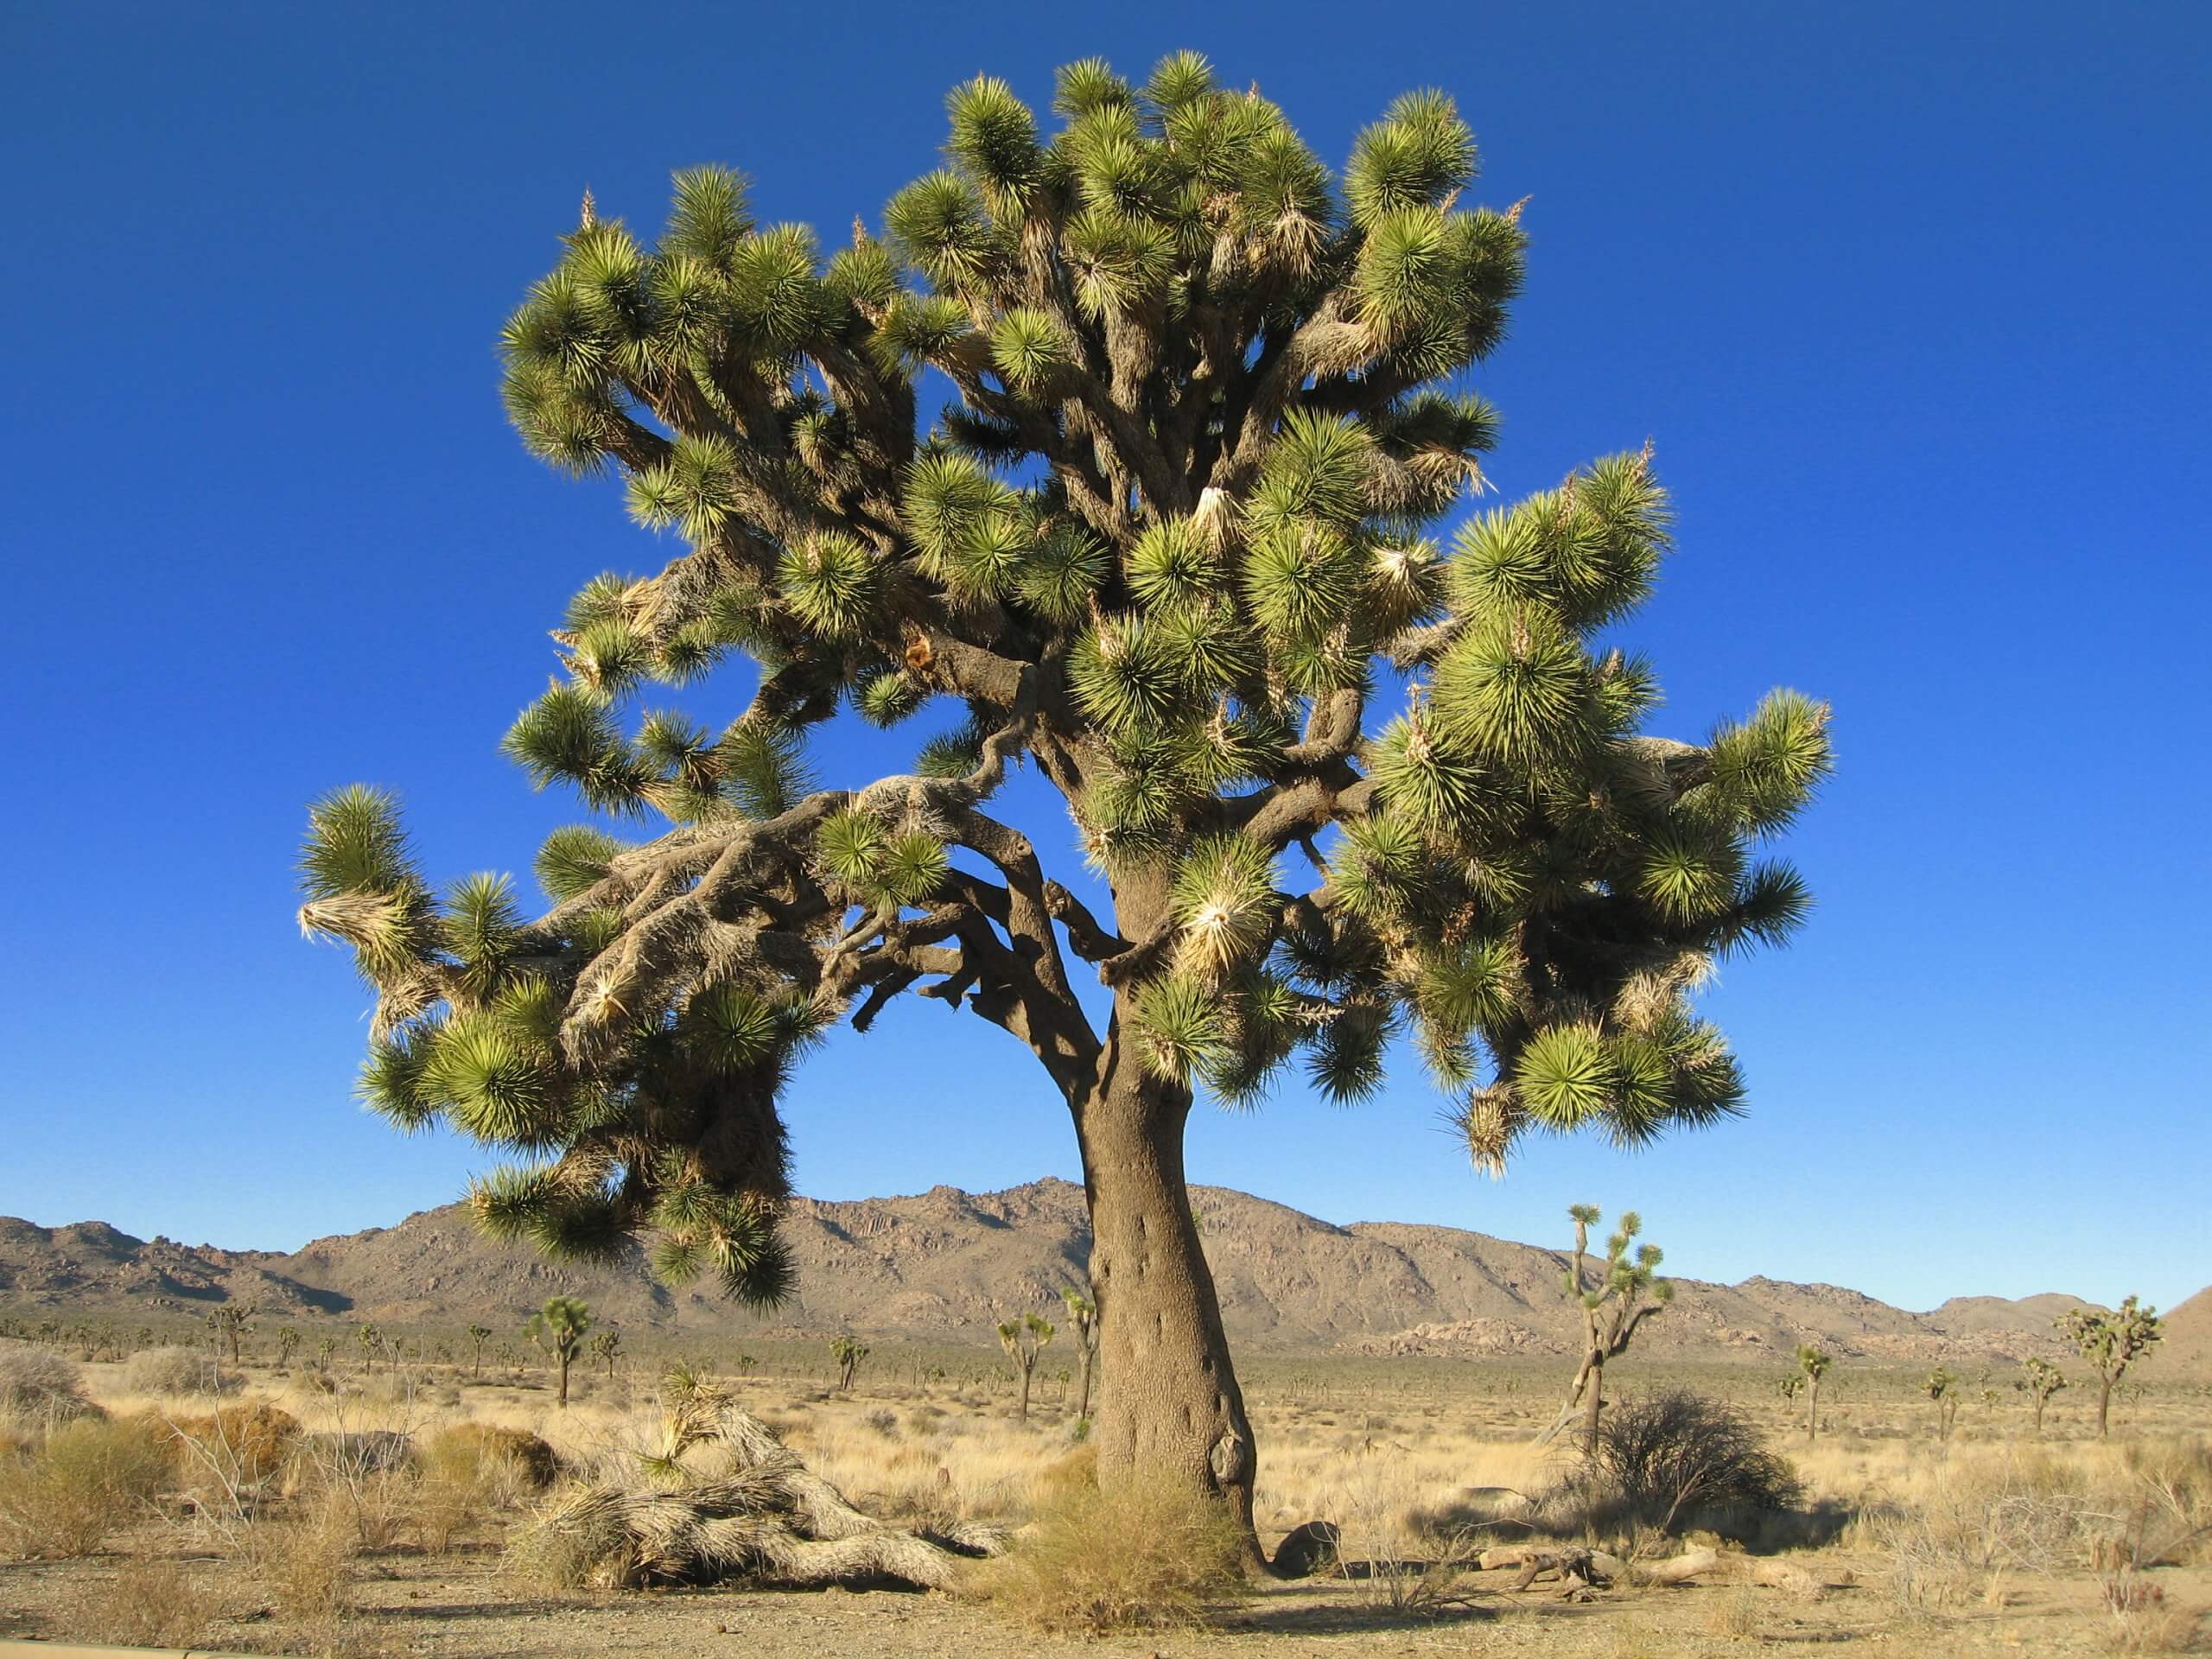 Yucca Brevifolia, a tall tree standing in the desert